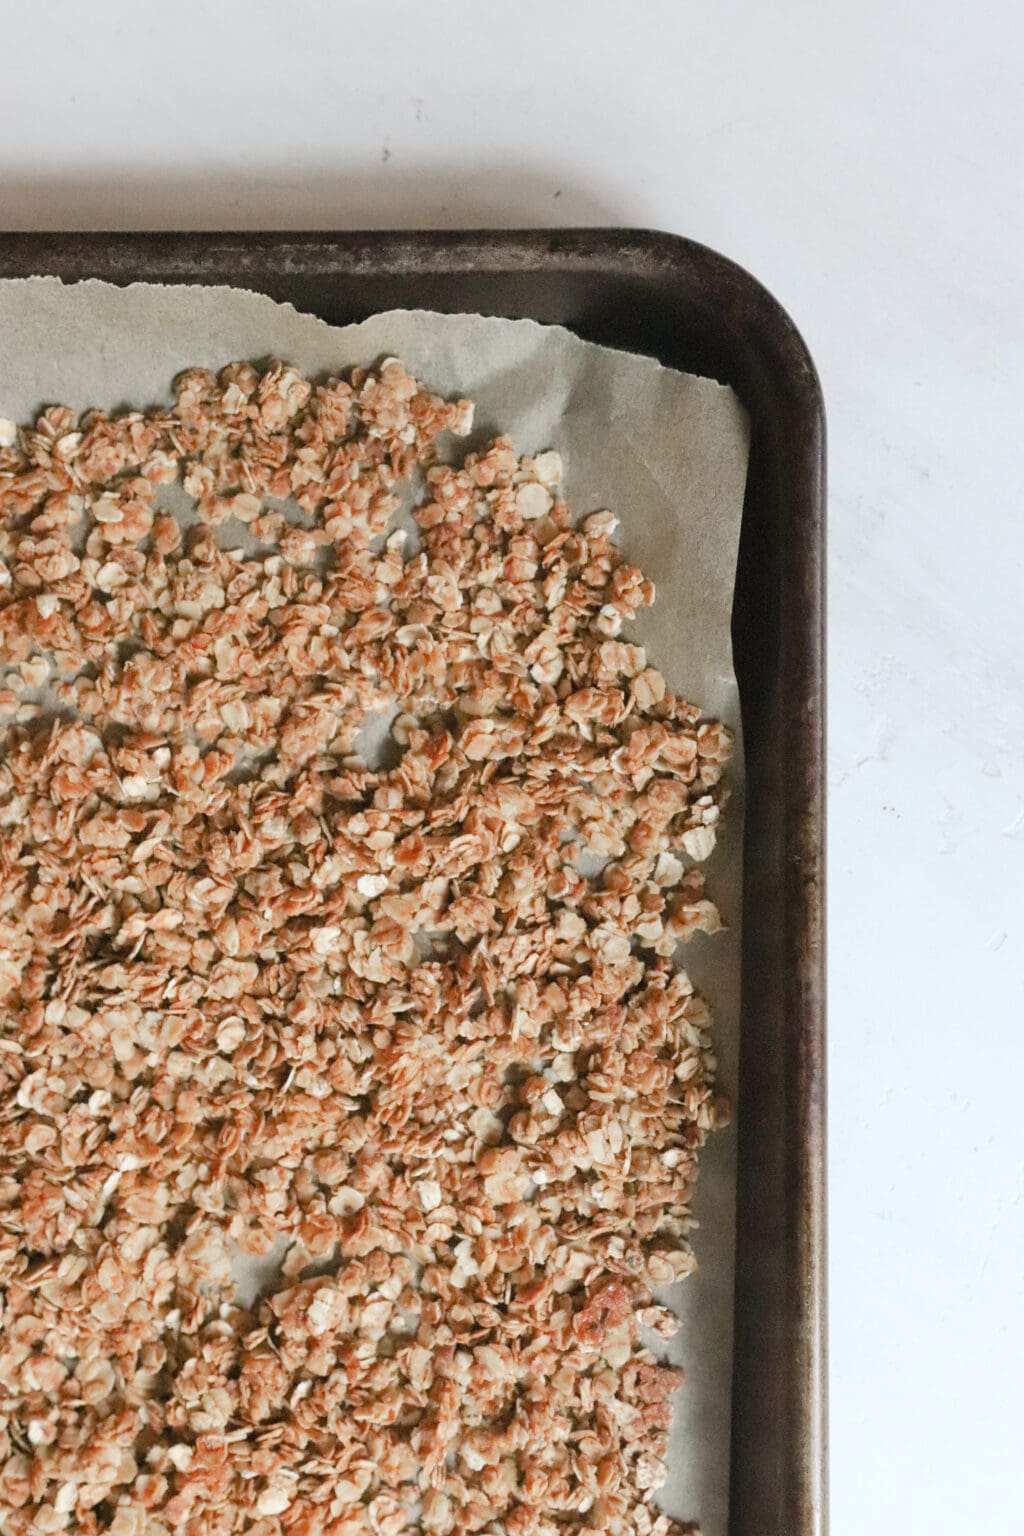 The image shows 3/4 of a baking sheet lined with parchment paper has golden oats evenly distributed across the pan.  